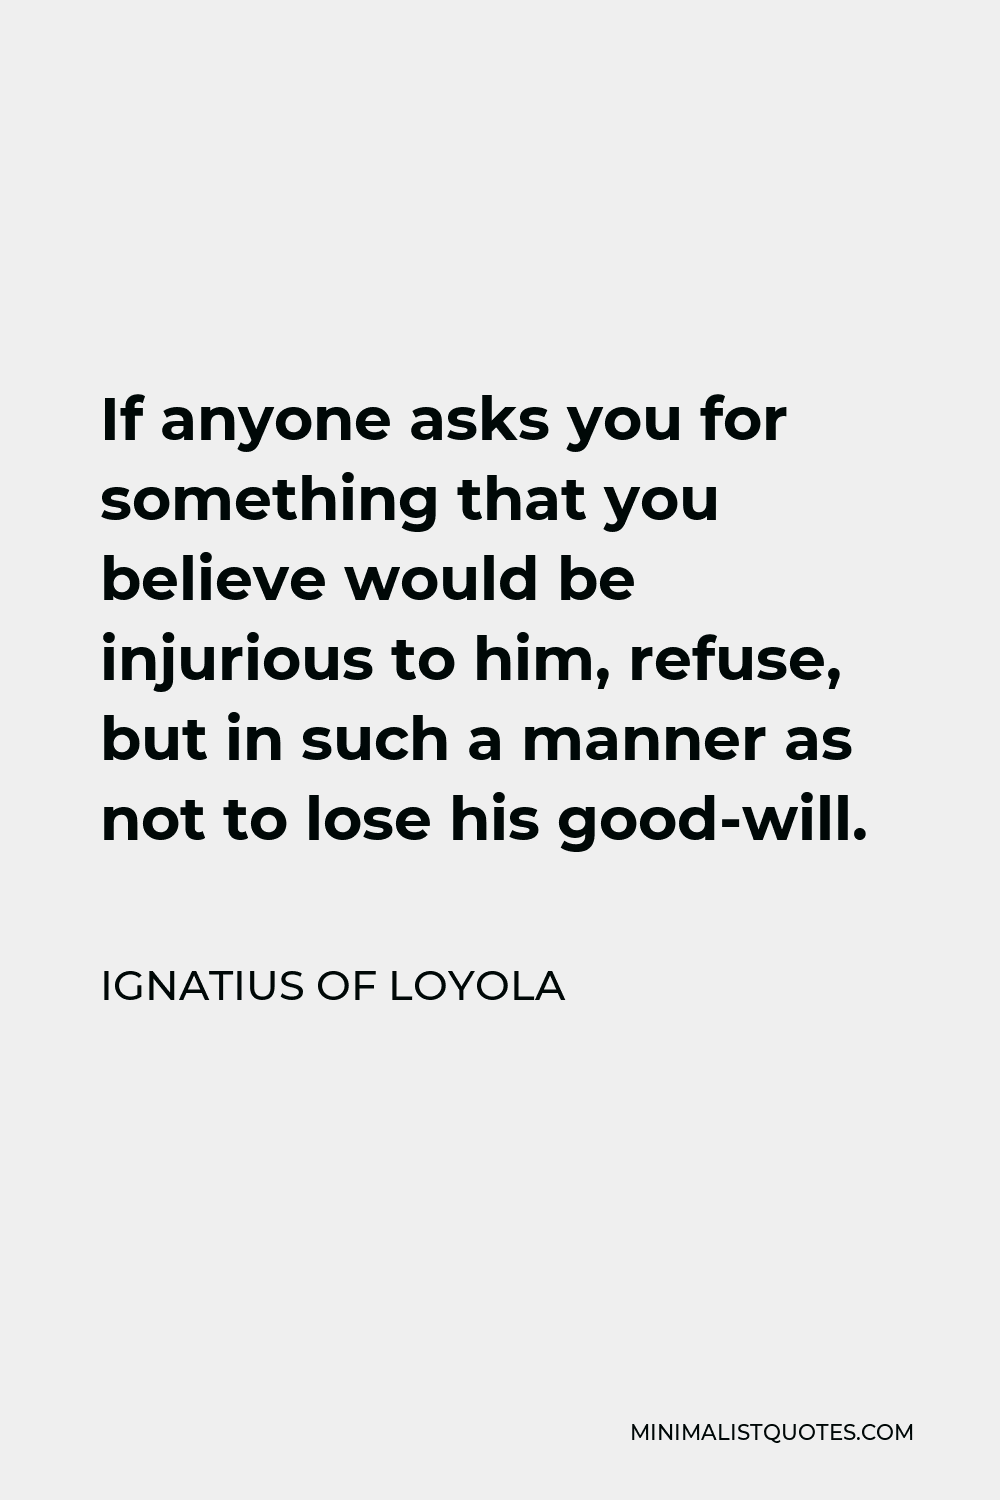 Ignatius of Loyola Quote - If anyone asks you for something that you believe would be injurious to him, refuse, but in such a manner as not to lose his good-will.